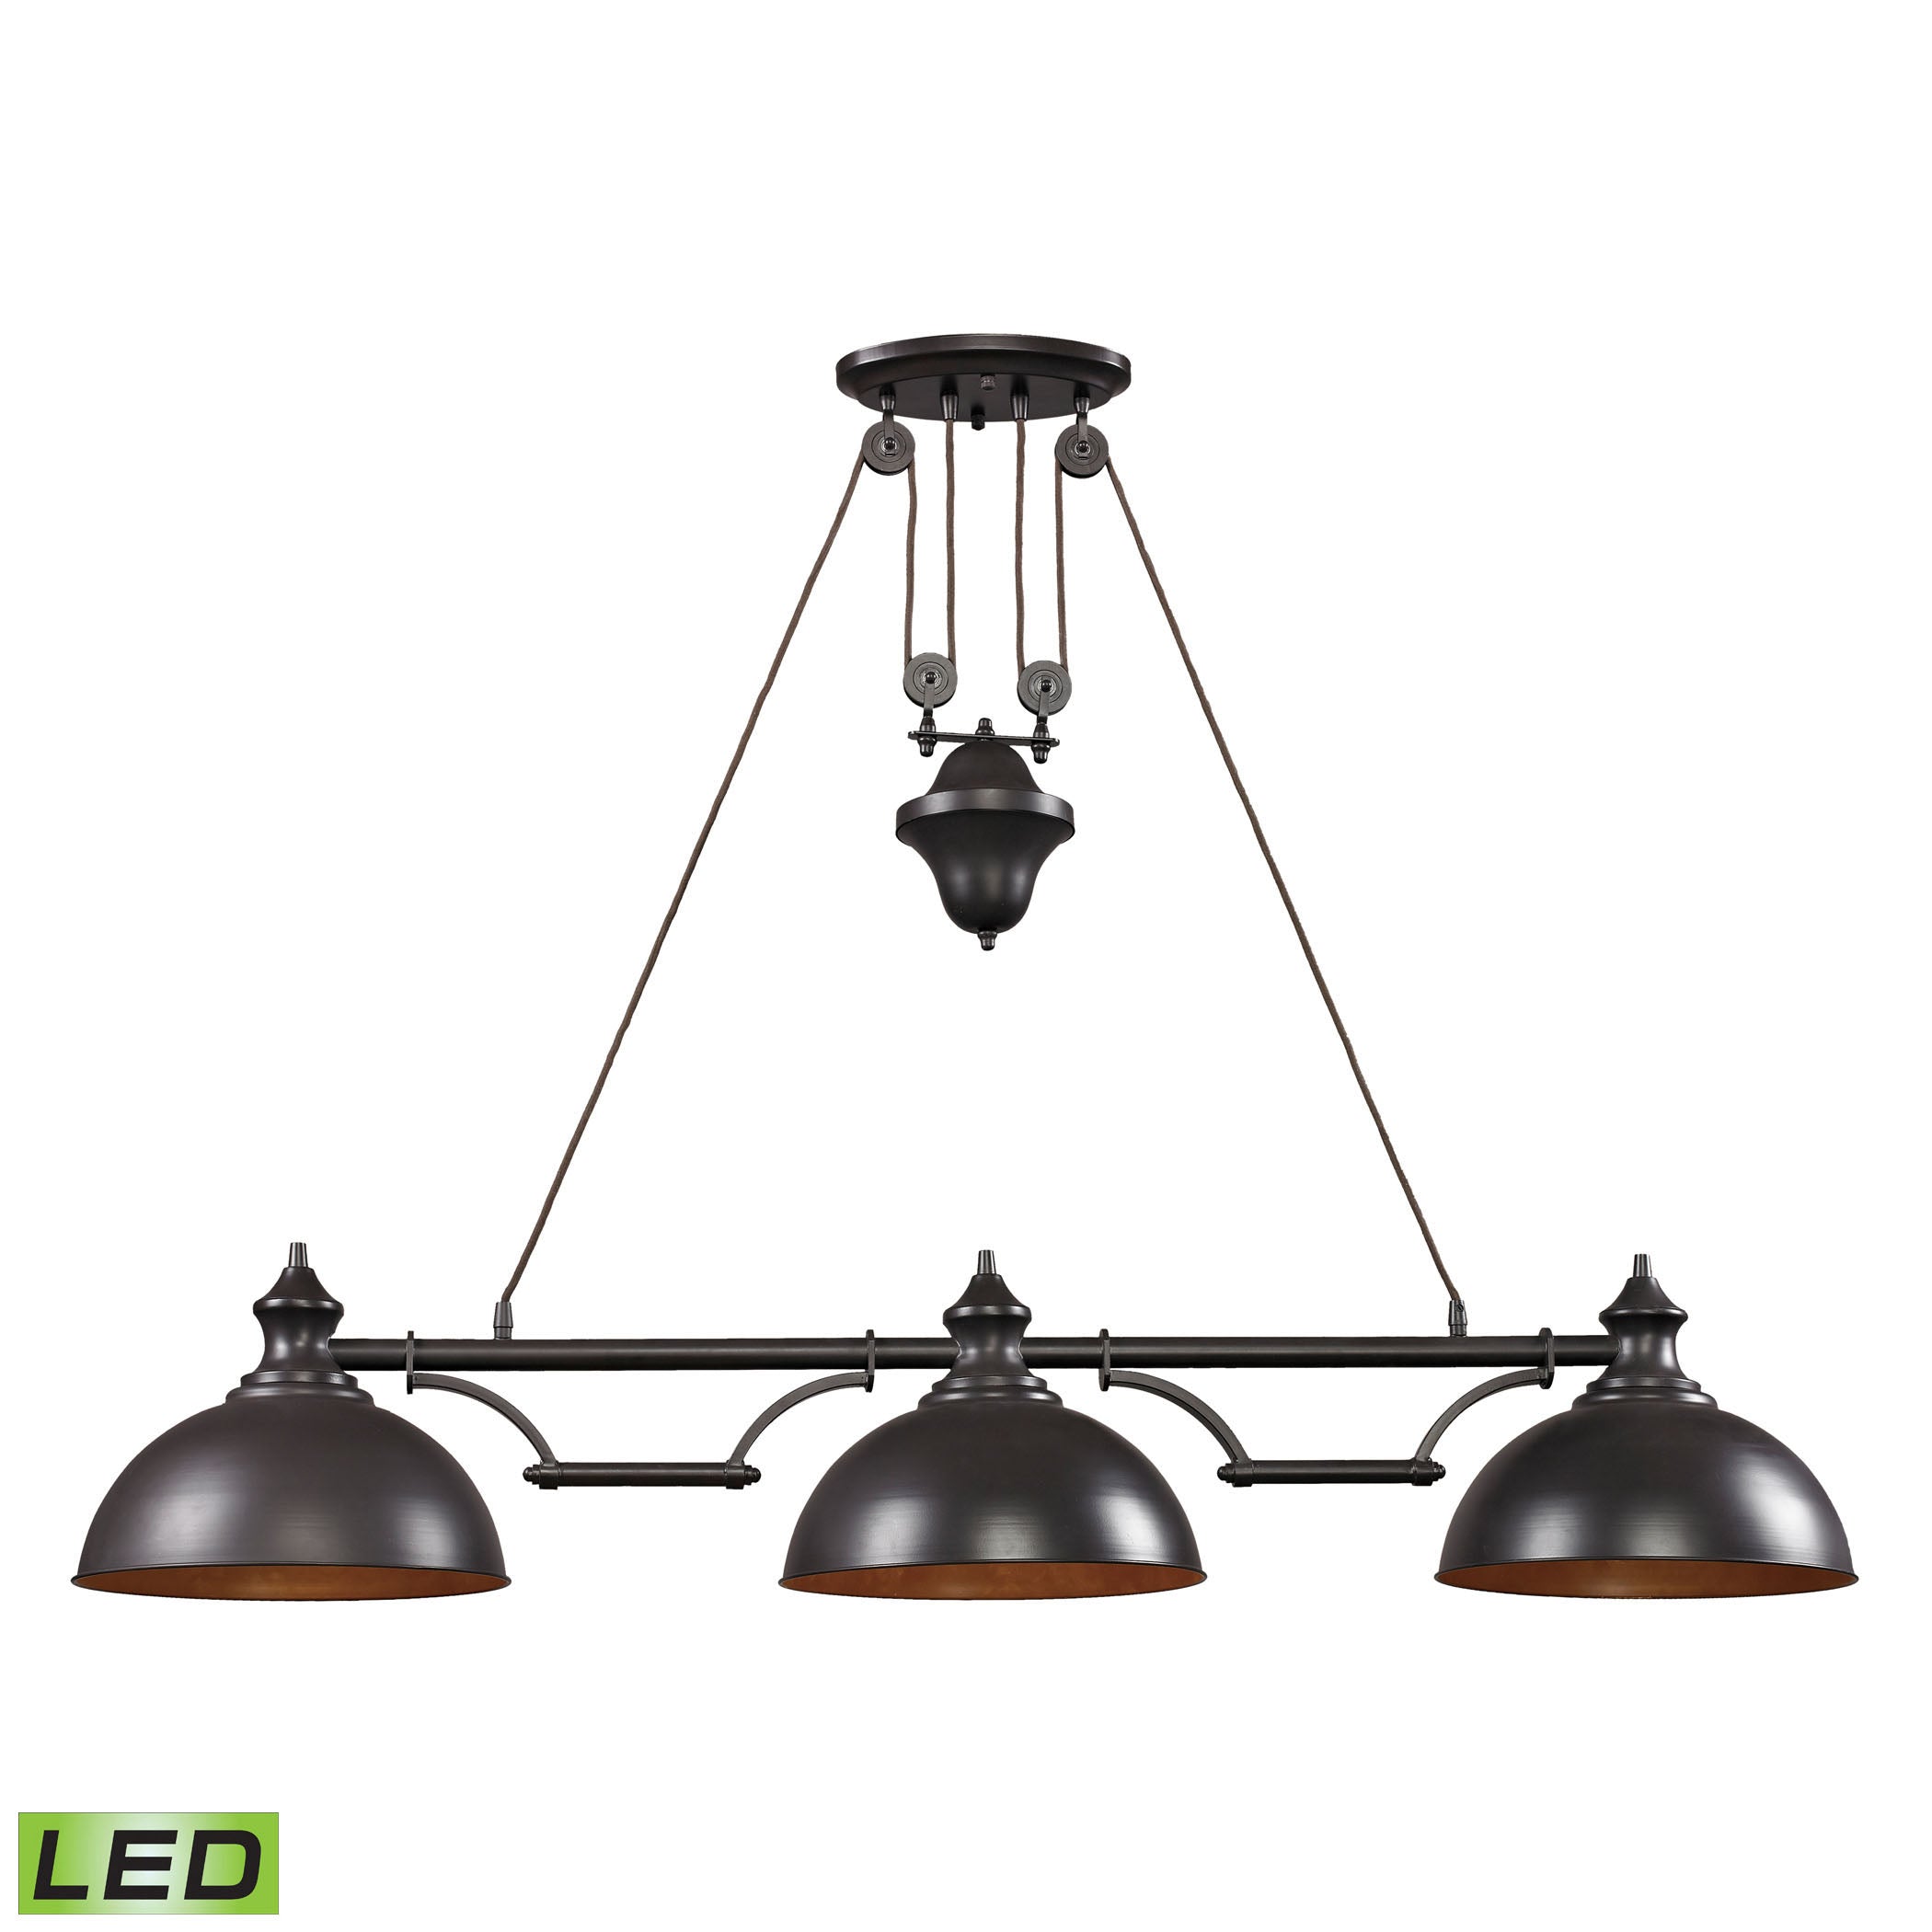 ELK Lighting 65151-3-LED Farmhouse 3-Light Island Light in Oiled Bronze with Matching Shade - Includes LED Bulbs